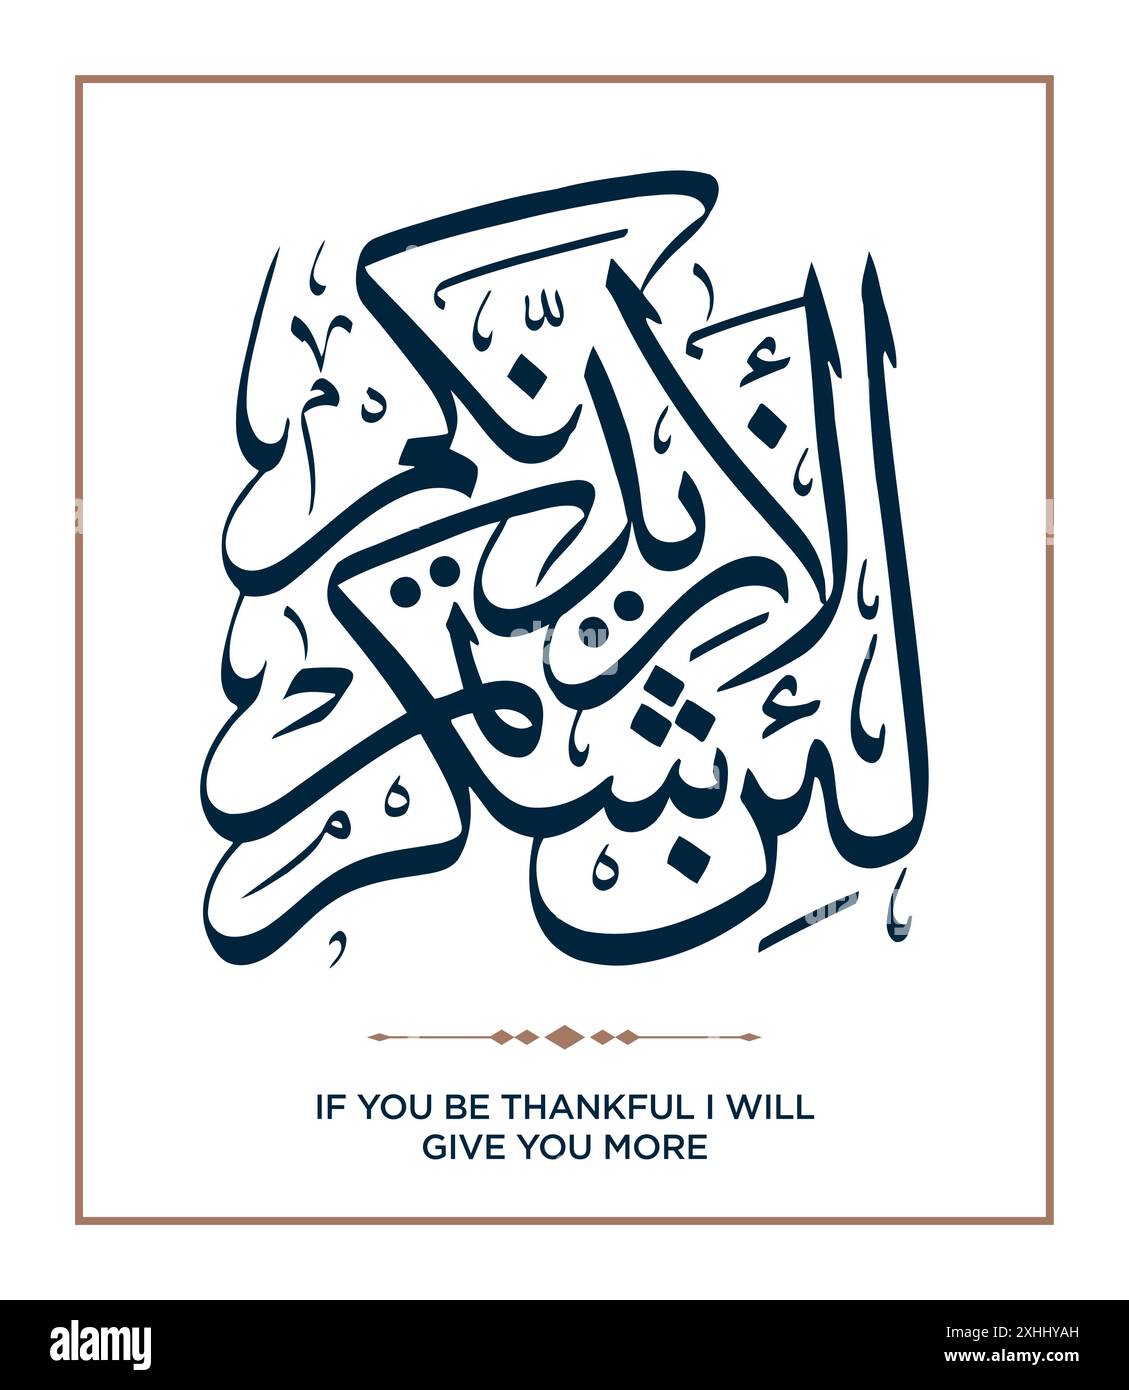 Verse from the Quran Translation: if you be thankful I will give you more - لَئِنْ شَكَرْتُمْ لَأَزِيدَنَّكُمْ Stock Vector